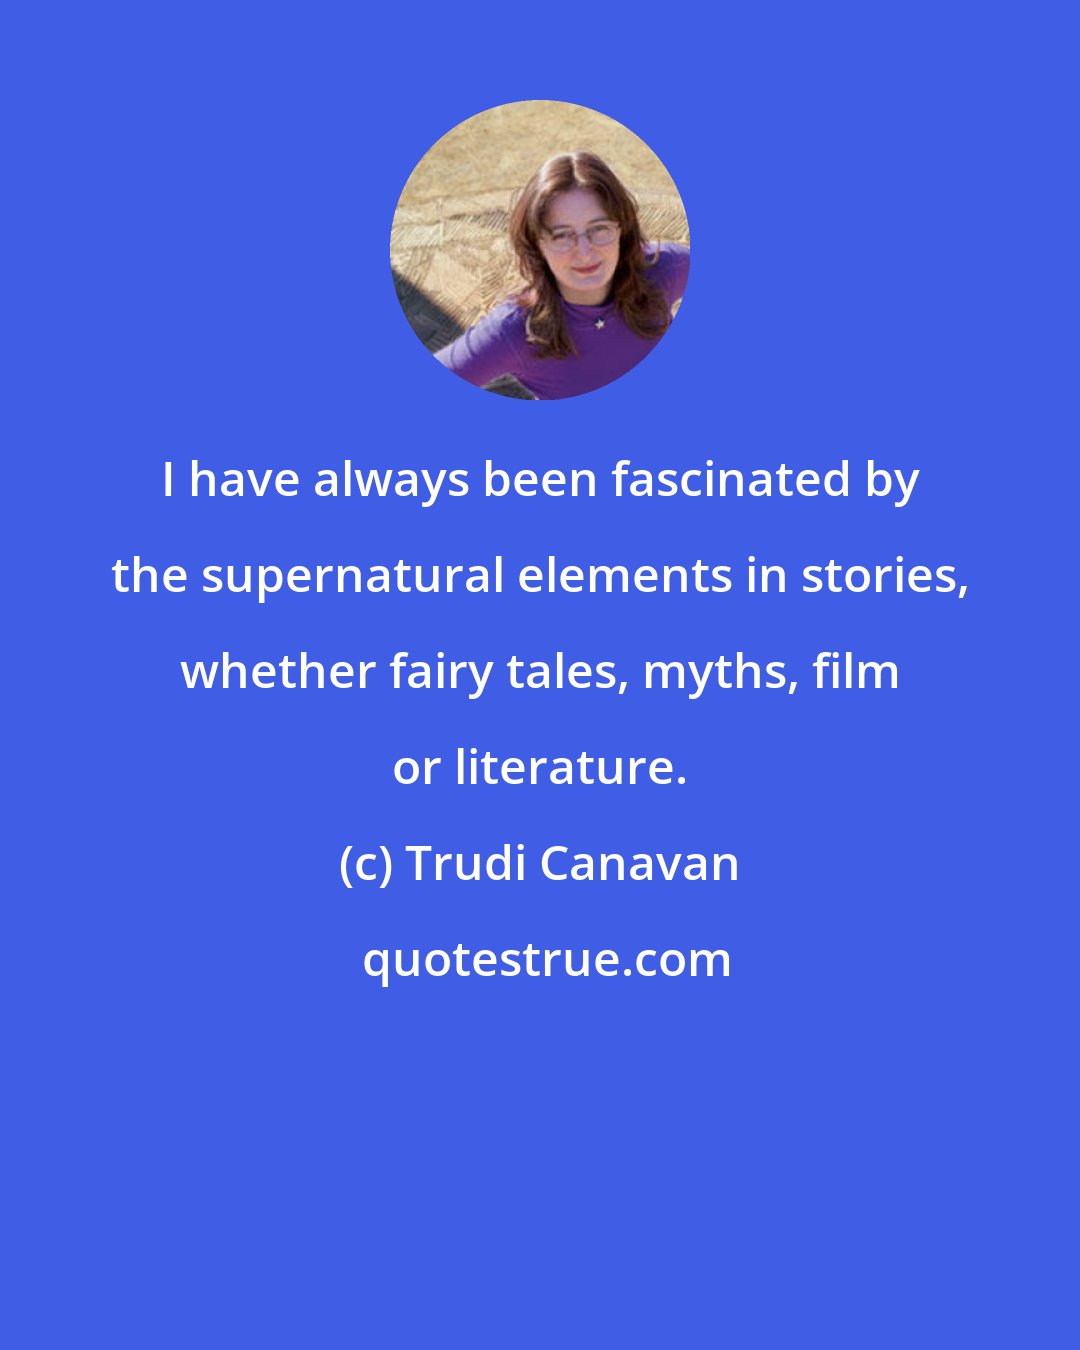 Trudi Canavan: I have always been fascinated by the supernatural elements in stories, whether fairy tales, myths, film or literature.